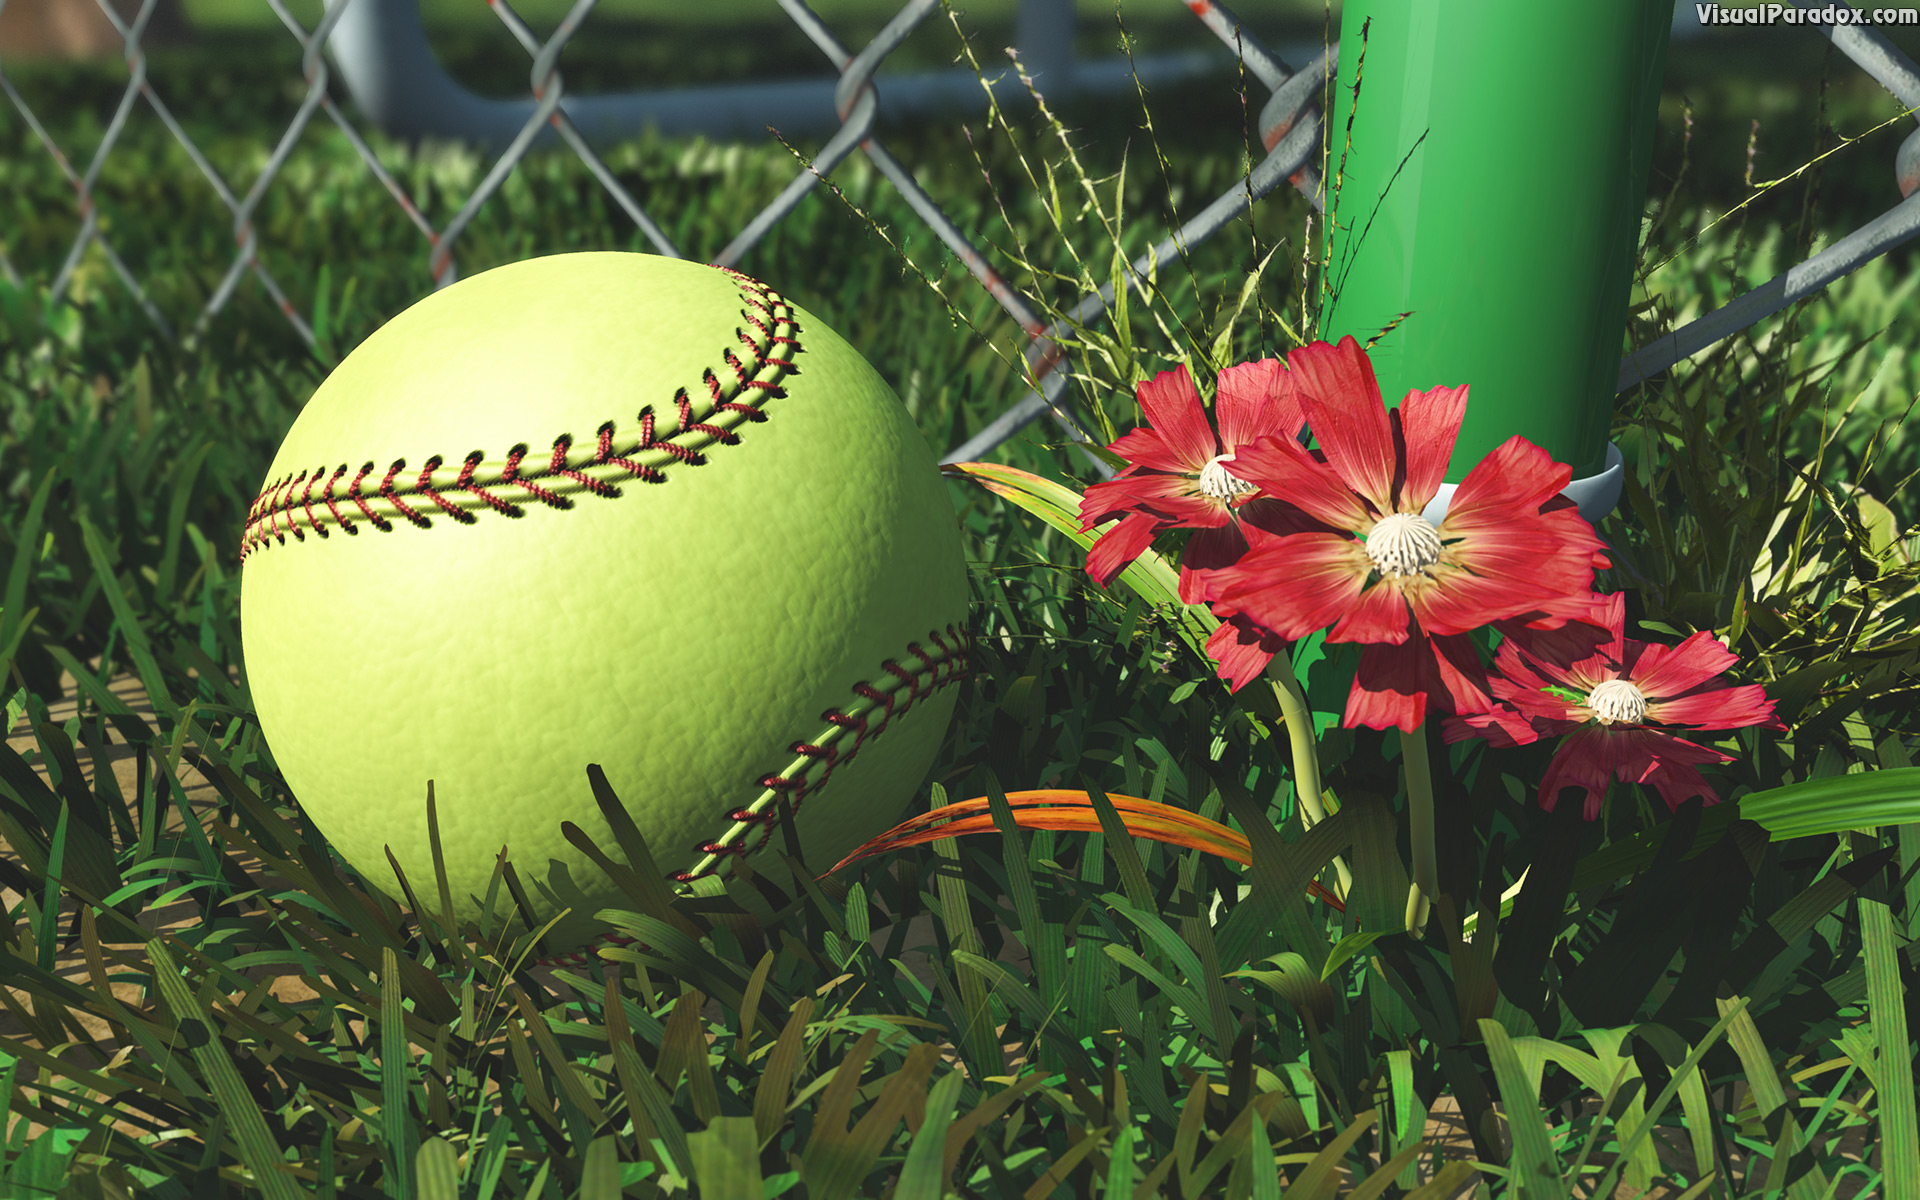 america, american, athletic, athletics, ball, ballpark, barrier, baseball, boundary, chain, closeup, color, detail, equipment, fence, field, flower, foul, game, gear, grass, green, infield, laces, lawn, league, leather, link, little, lost, metal, outdoor, outfield, pink, pitch, practice, recreation, red, season, single, soft, softball, sport, sports, spring, stitches, stitching, summer, team, weeds, wire, yellow, 3d, wallpaper